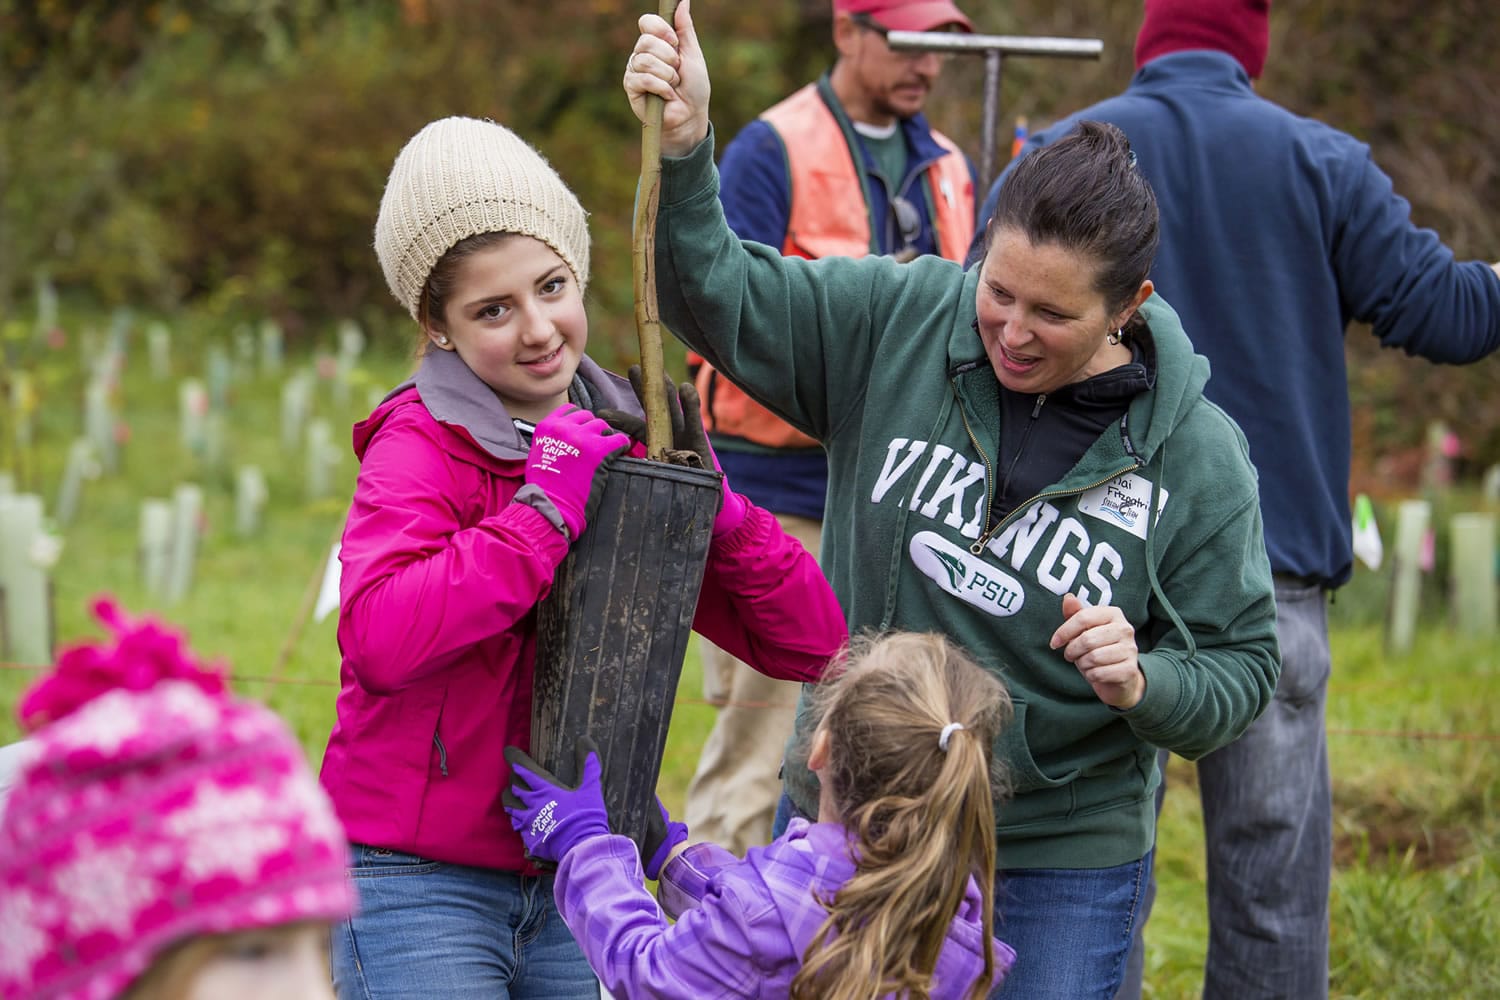 Washington State University Vancouver: More than 200 volunteers helped Clark Public Utilities' StreamTeam plant 1,013 trees during the Oct.